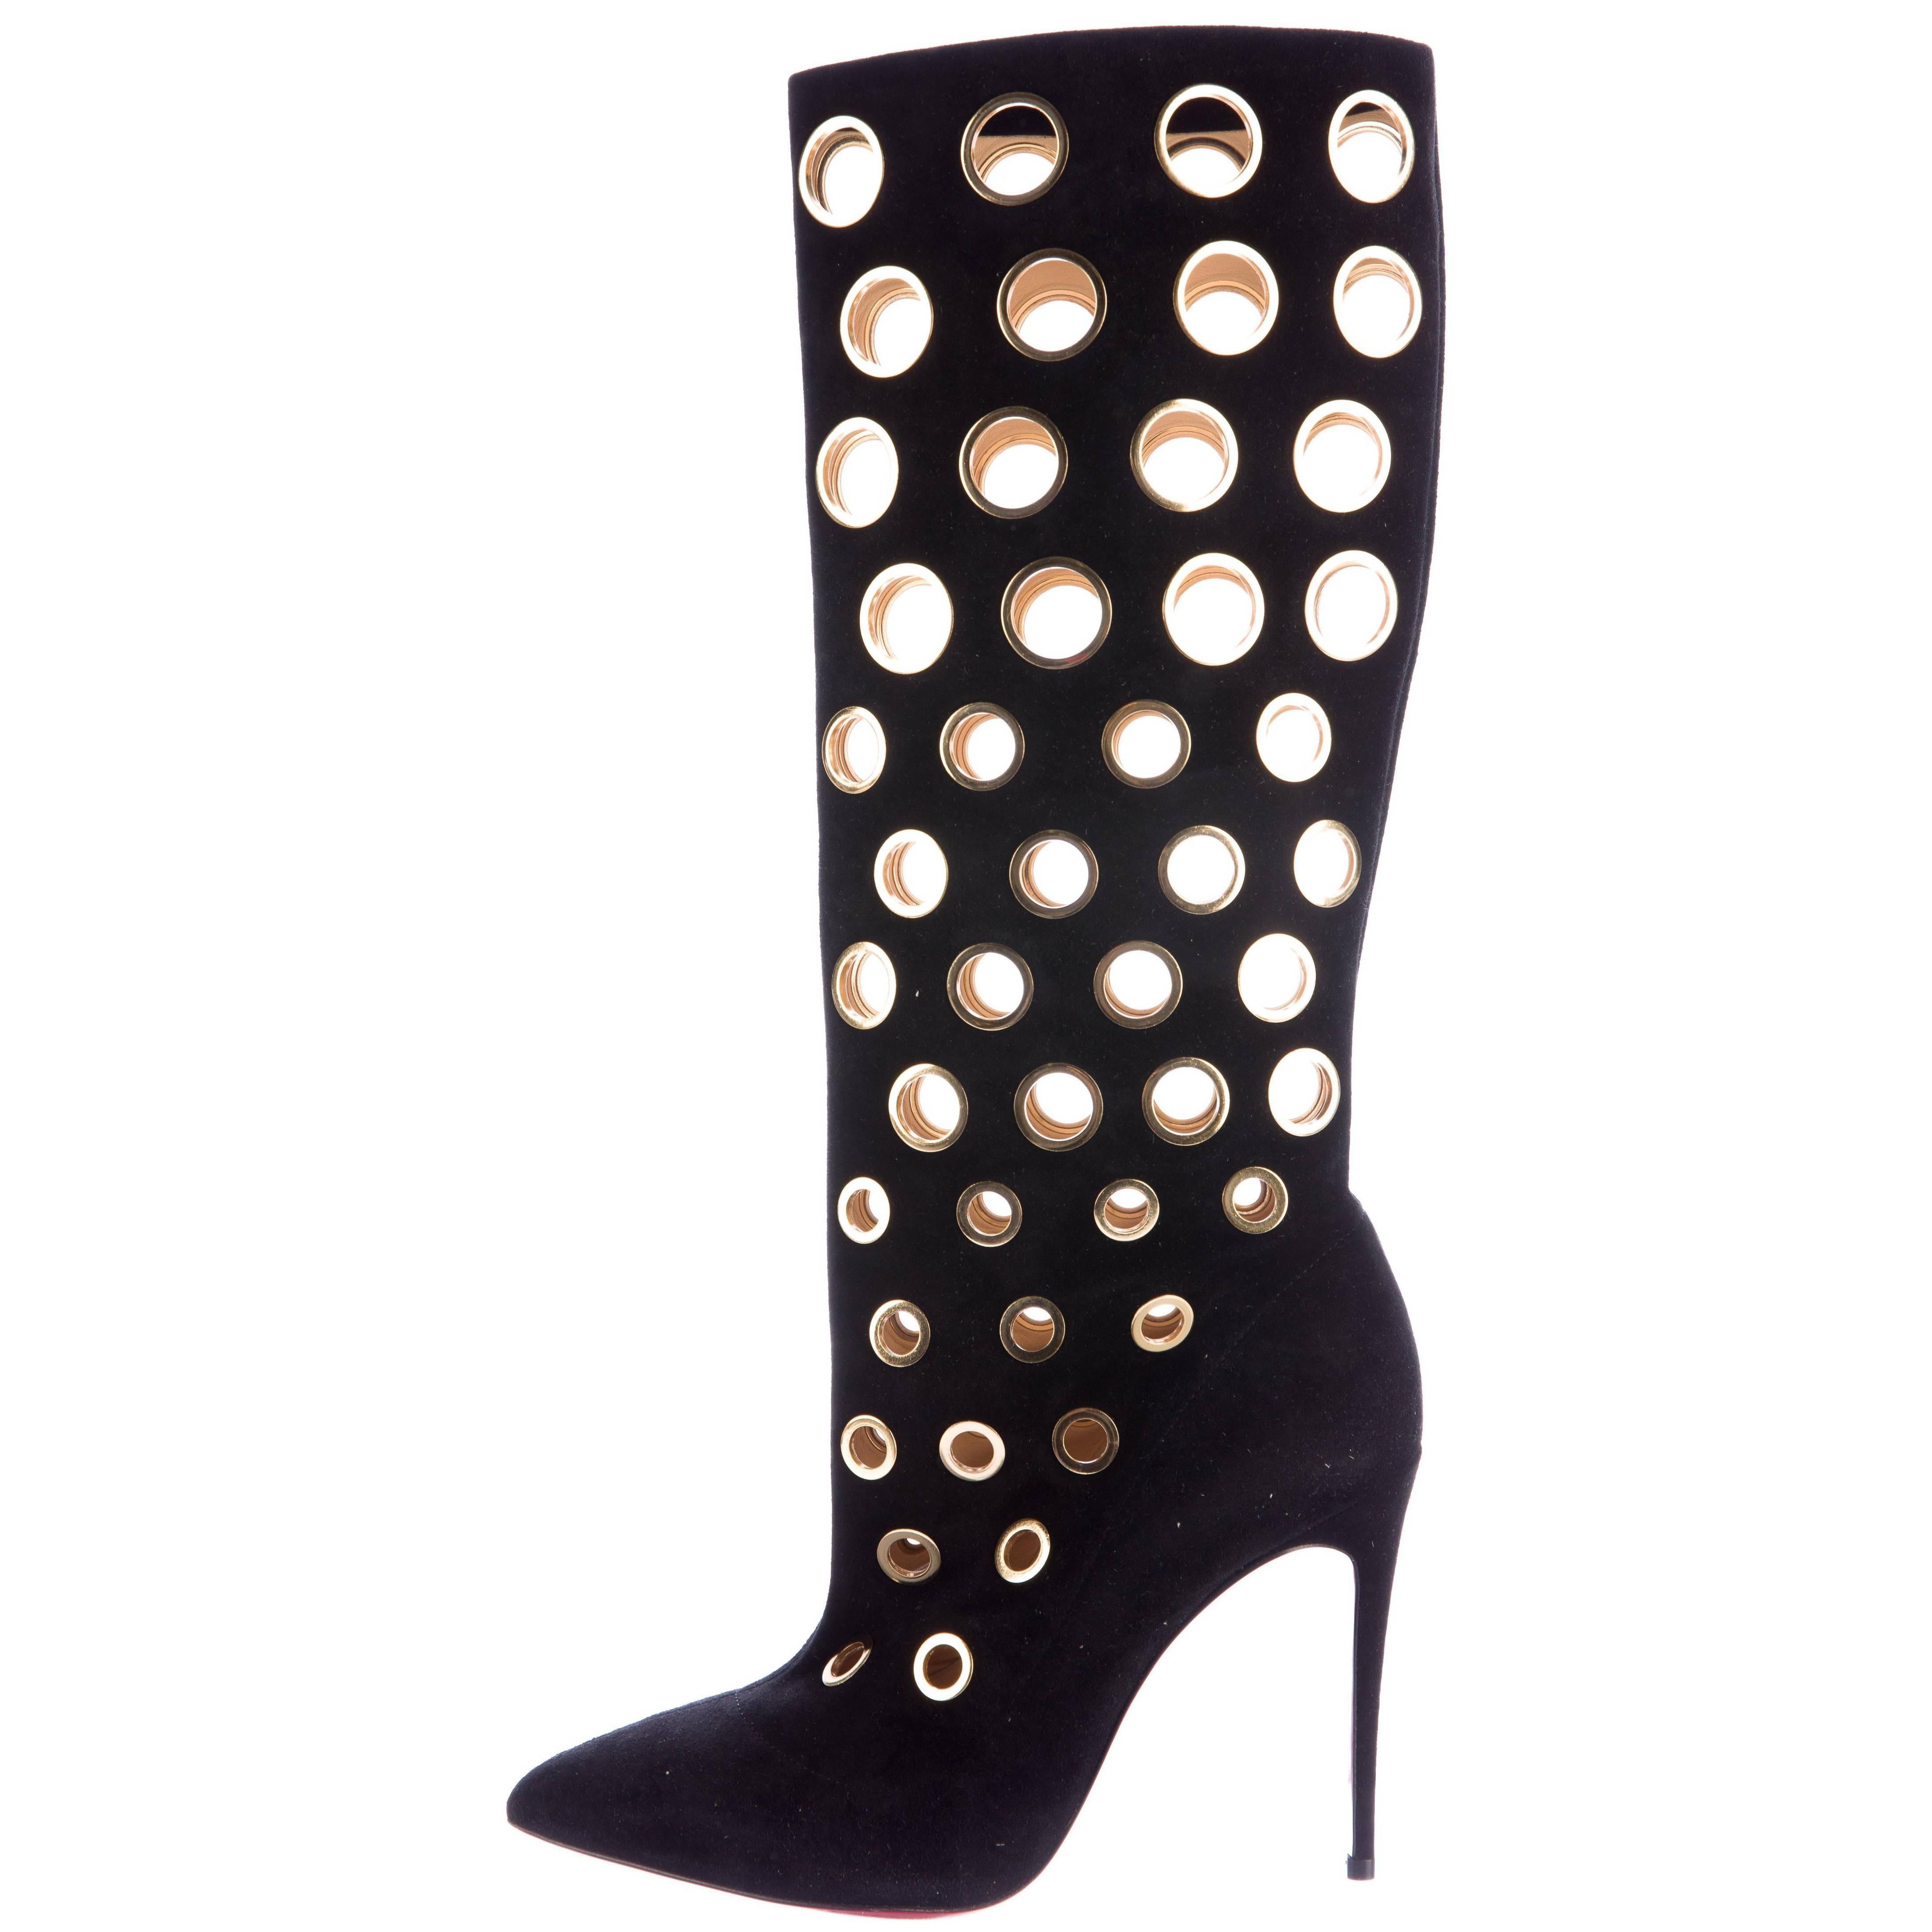 Christian Louboutin New Black Suede Gold Cut Out Knee High Heels Boots in Box